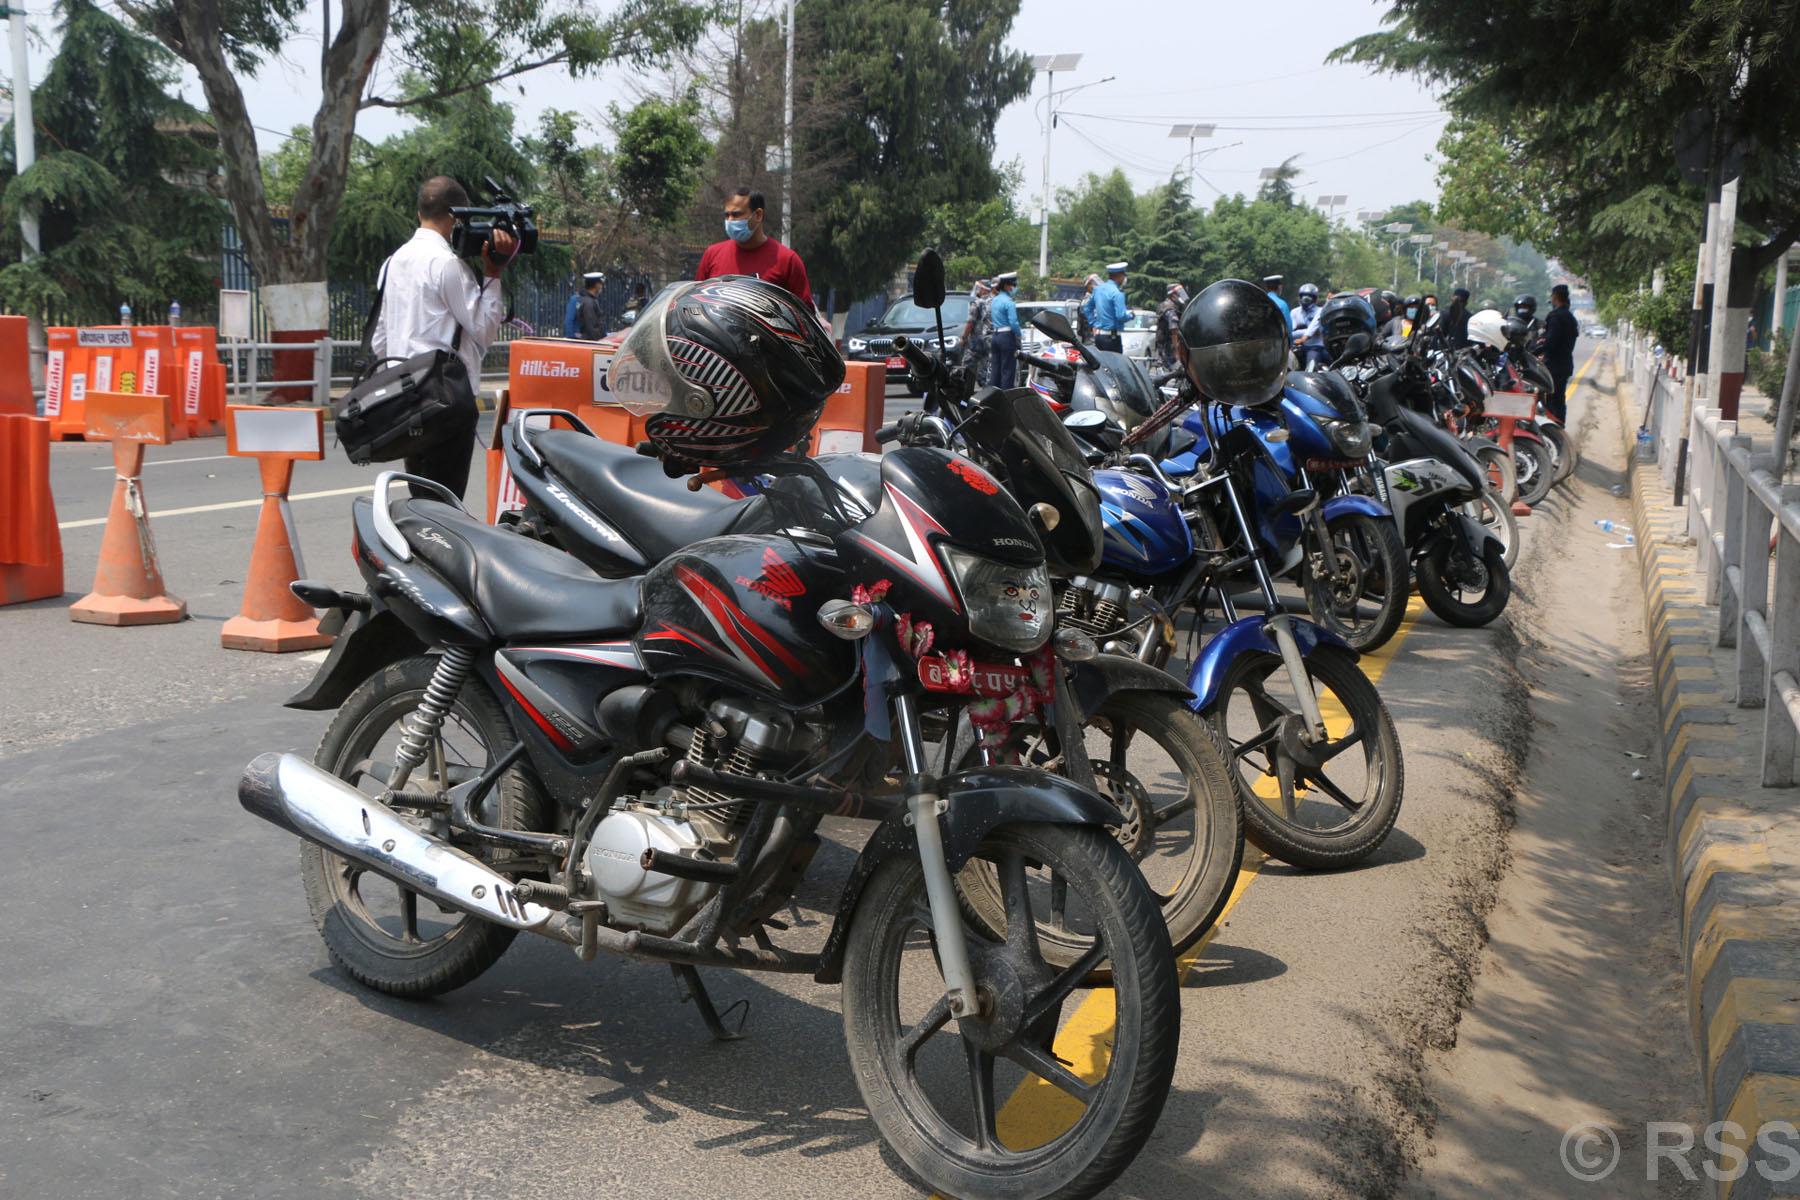 Govt imposes ban on import of motorcycles above 150 CC